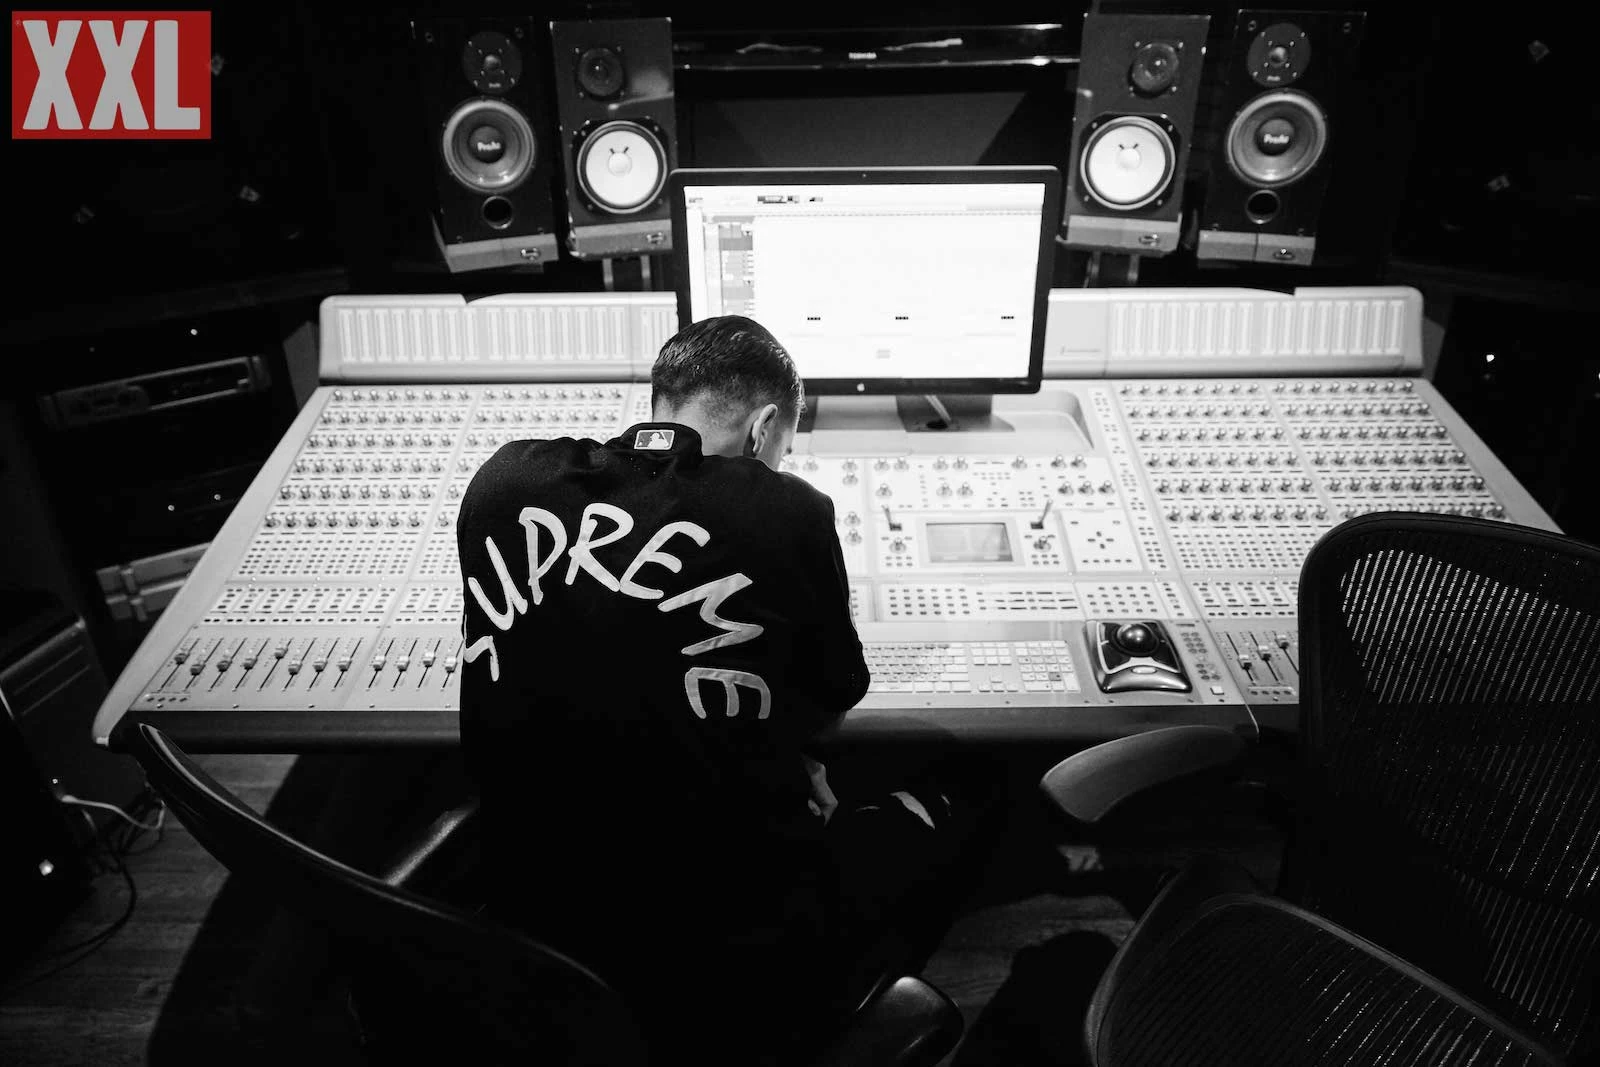 G-Eazy Is Finding His Own Sound on His Next Album - XXL1600 x 1067